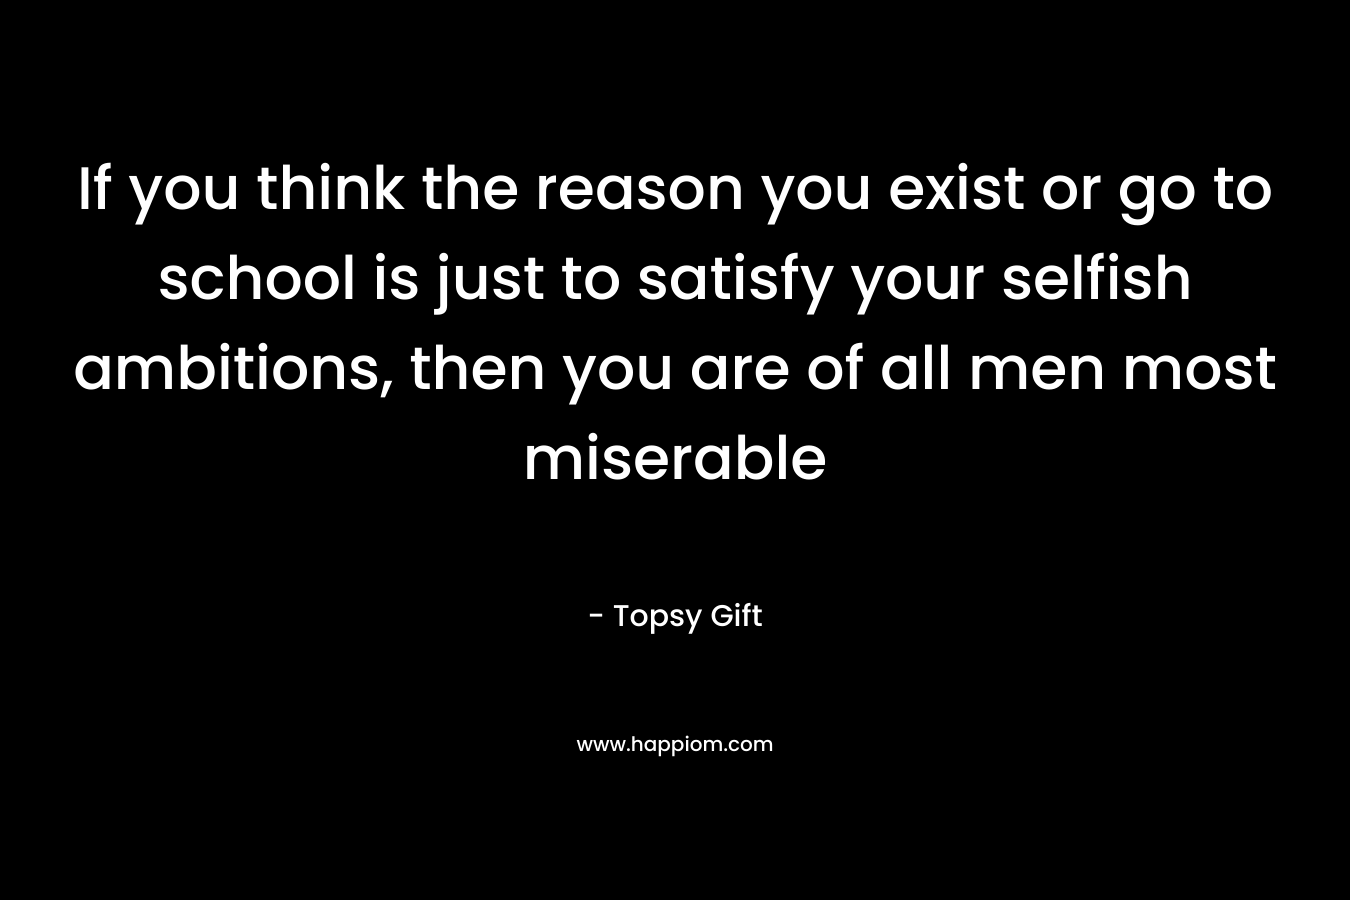 If you think the reason you exist or go to school is just to satisfy your selfish ambitions, then you are of all men most miserable – Topsy Gift